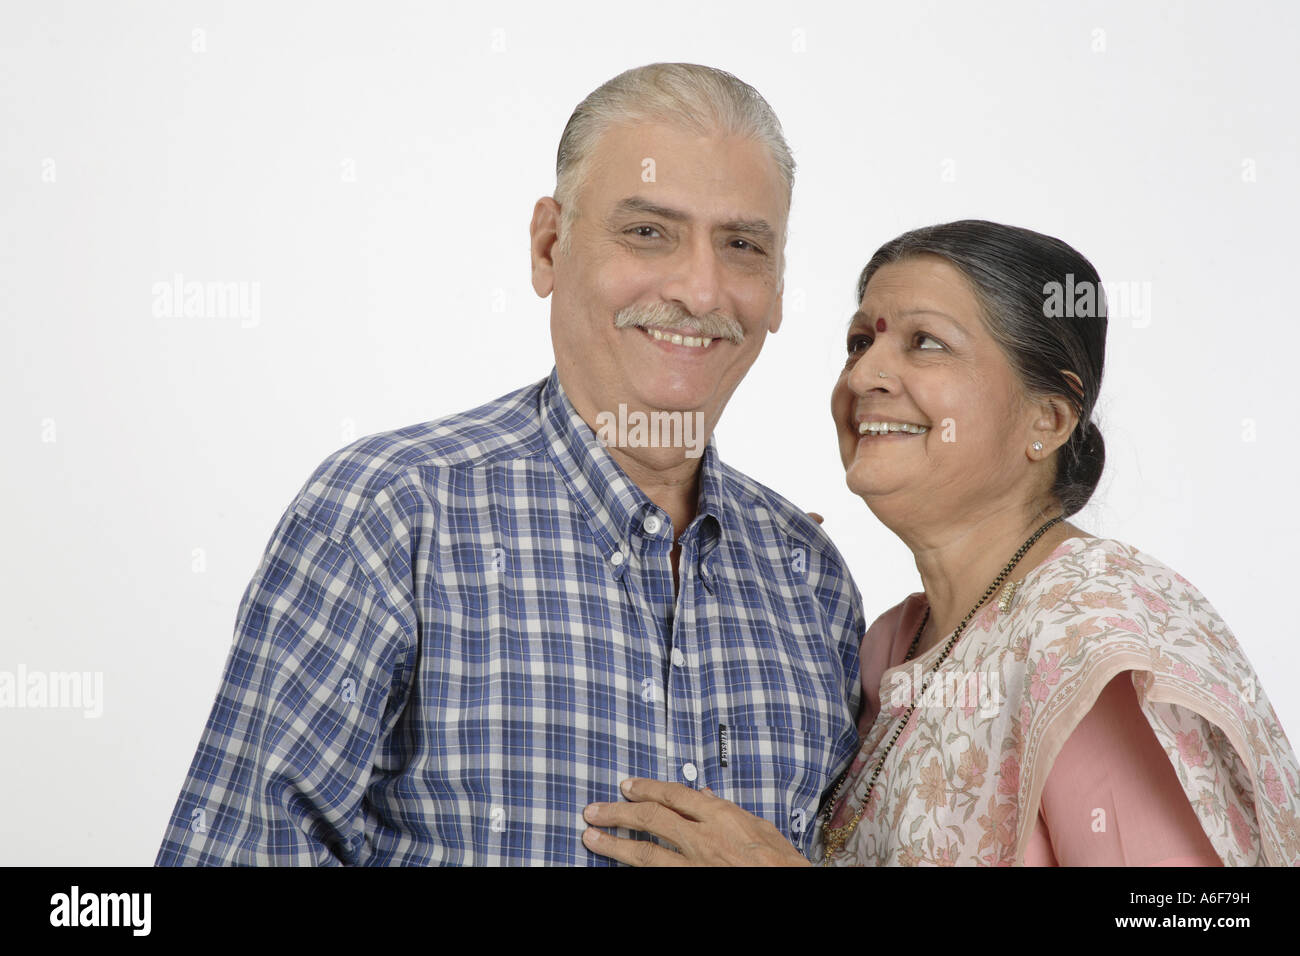 Old couple smiling lady kept her right hand on the shoulder and other on his chest looking at him and smiling Stock Photo